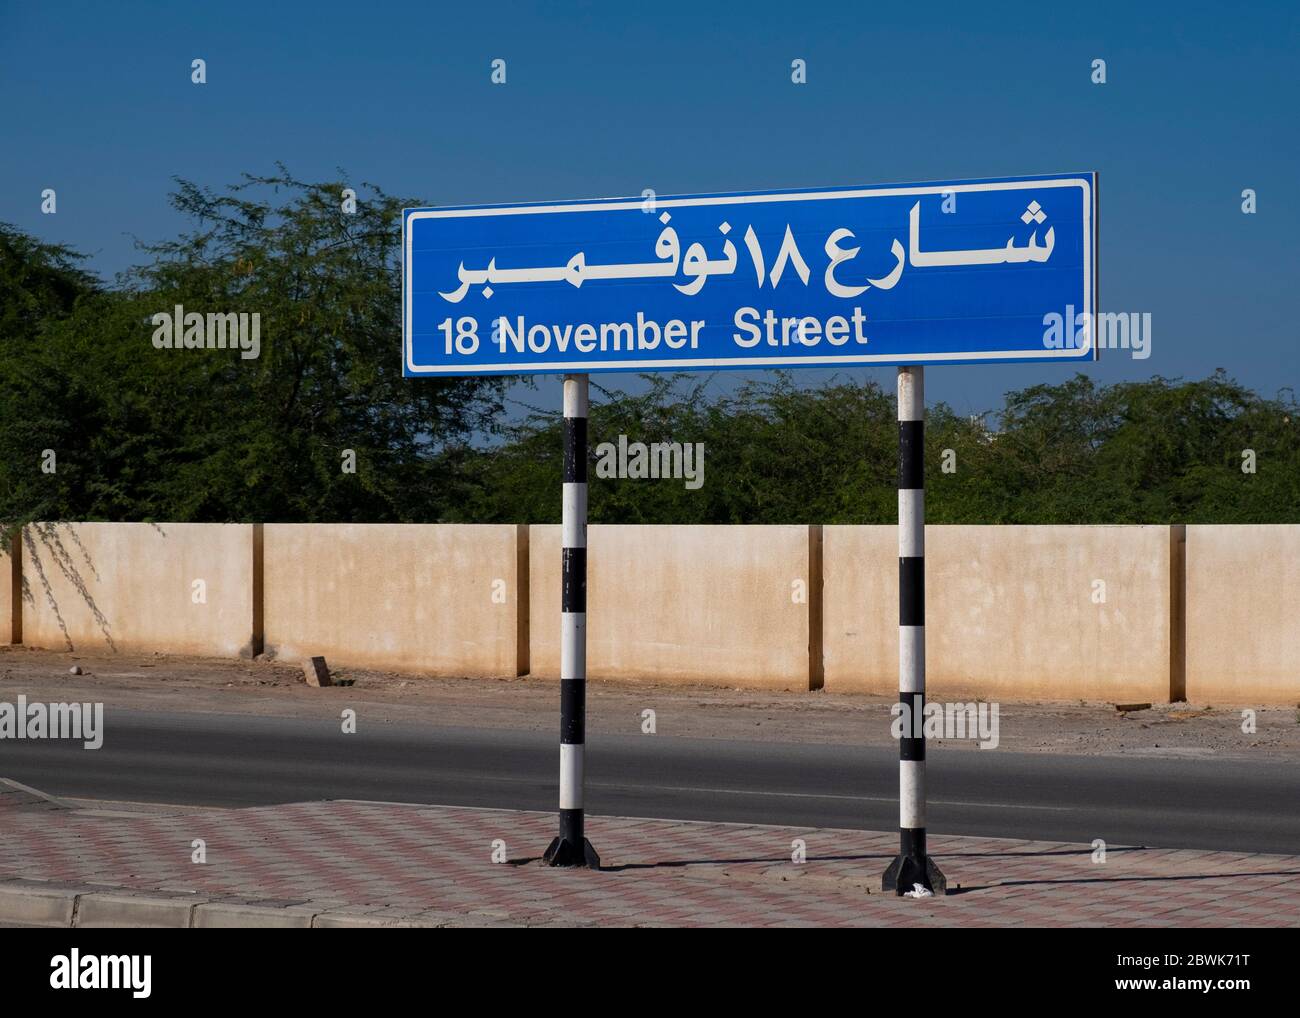 18 November Street sign in Muscat, Sultanate of Oman Stock Photo